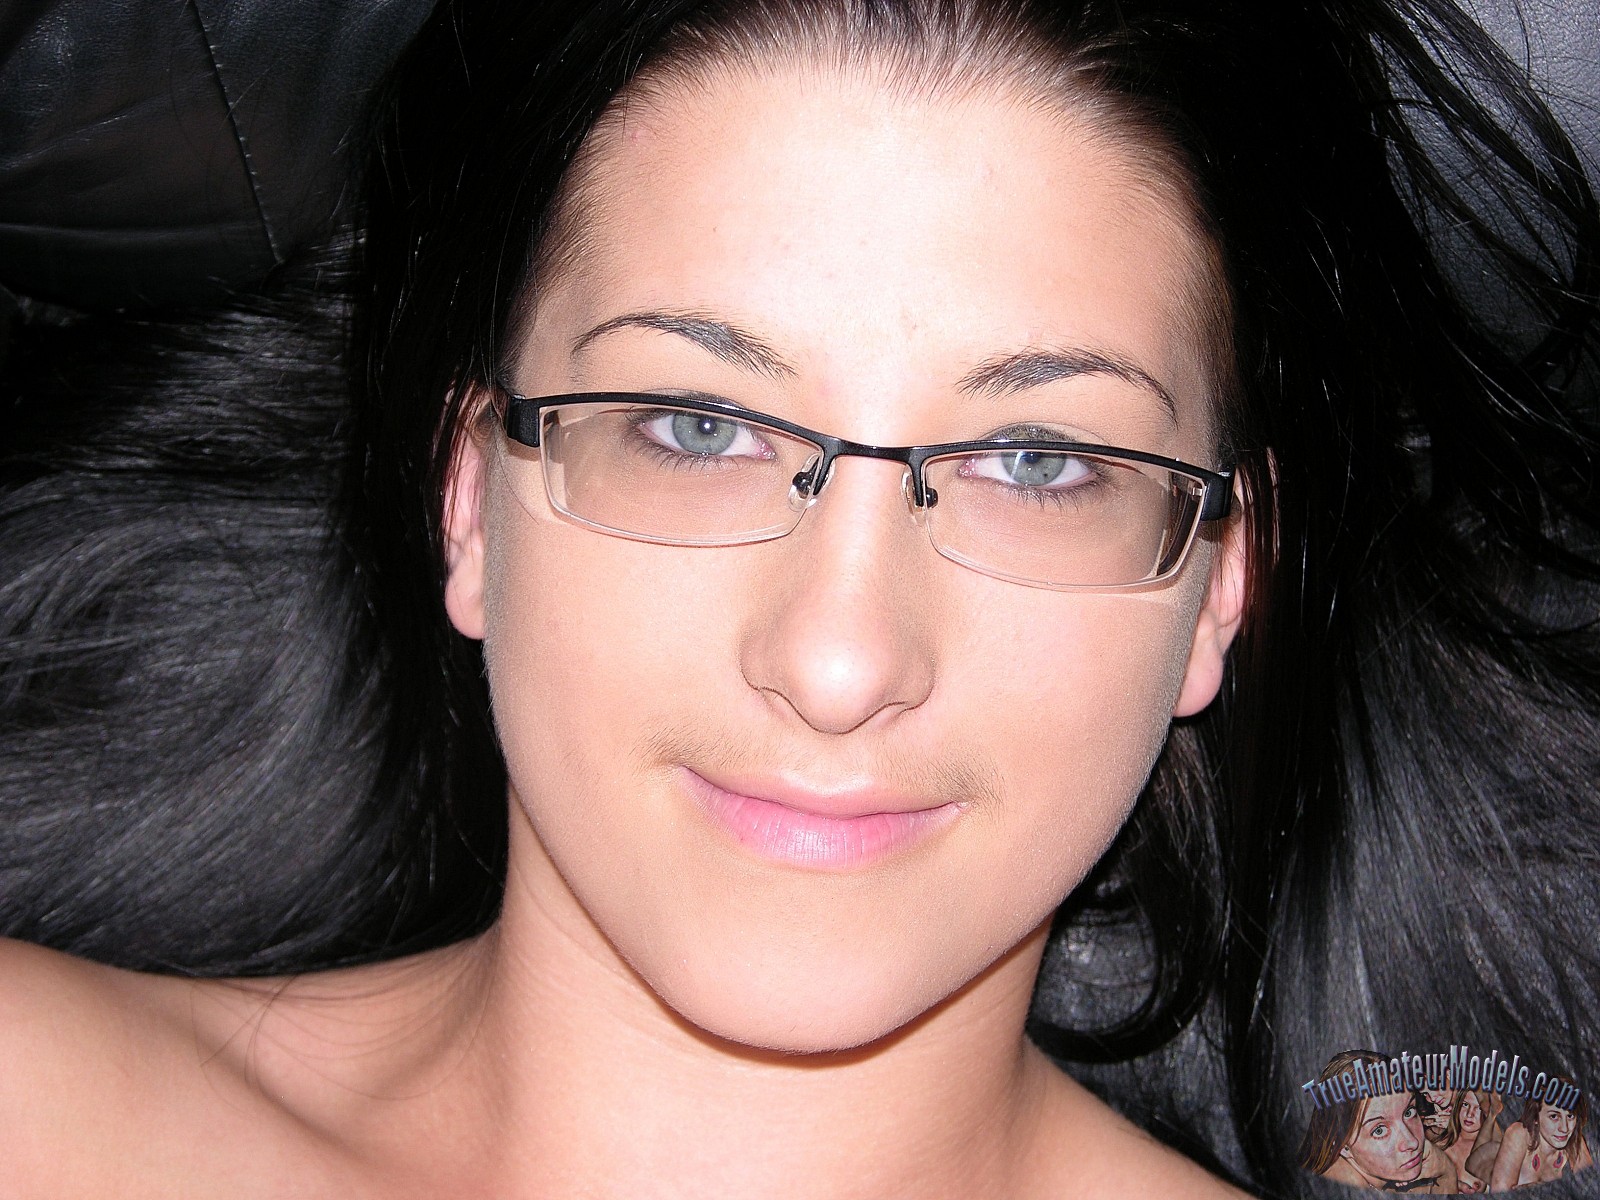 Sexy Girls wearing Glasses Page 286 Freeones Forum pic picture picture